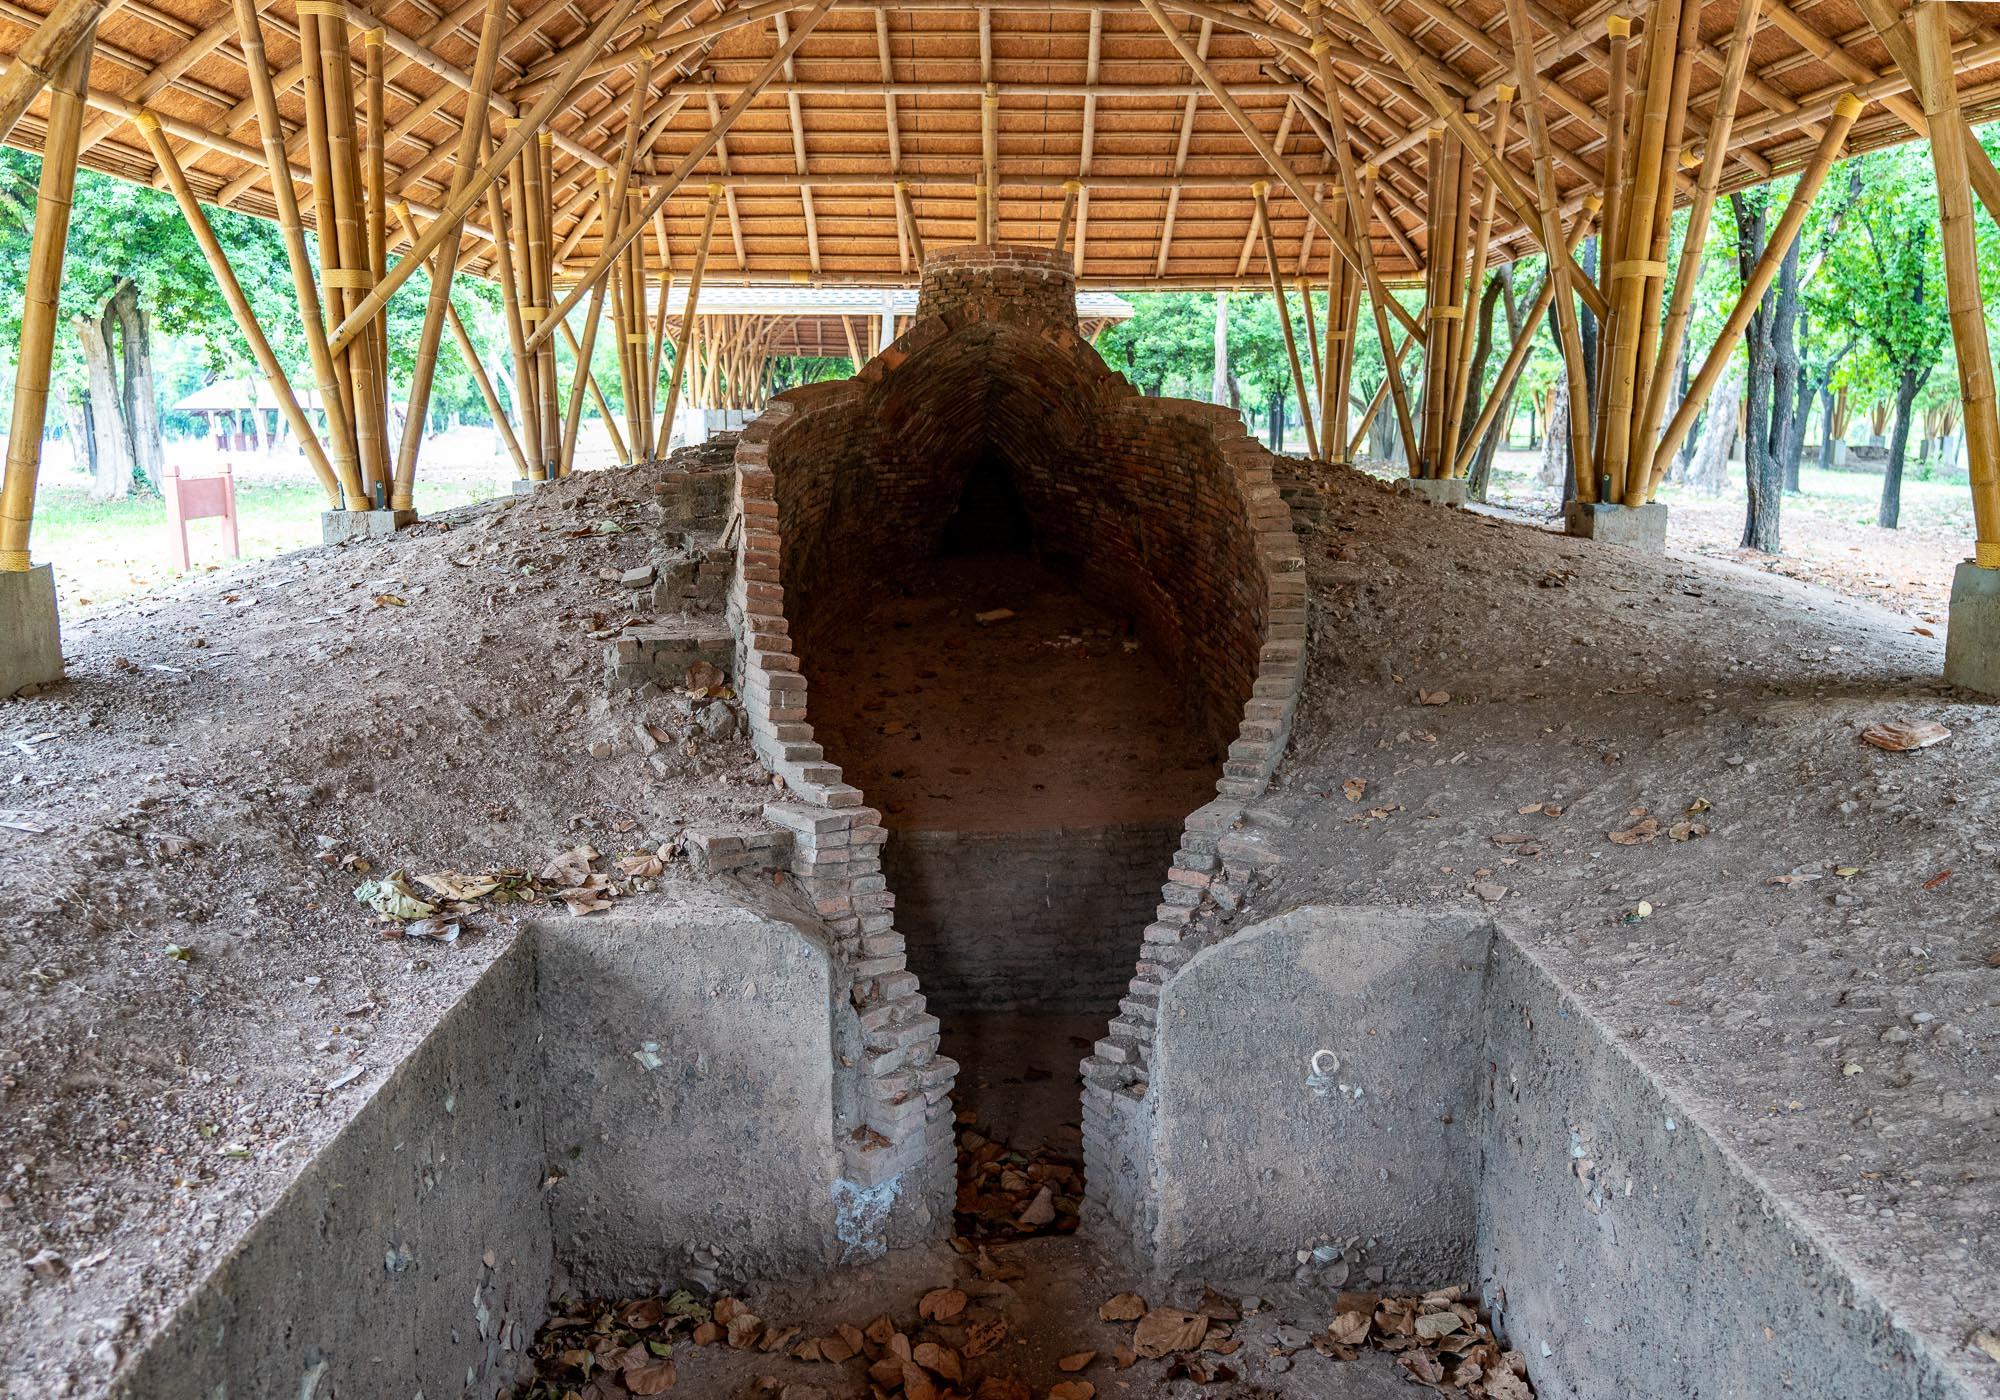 One of the ancient underground kilns at Tao Thu Riang, which has been restored so visitors can see how Sukhothai's ceramics were made. – © Michael Turtle